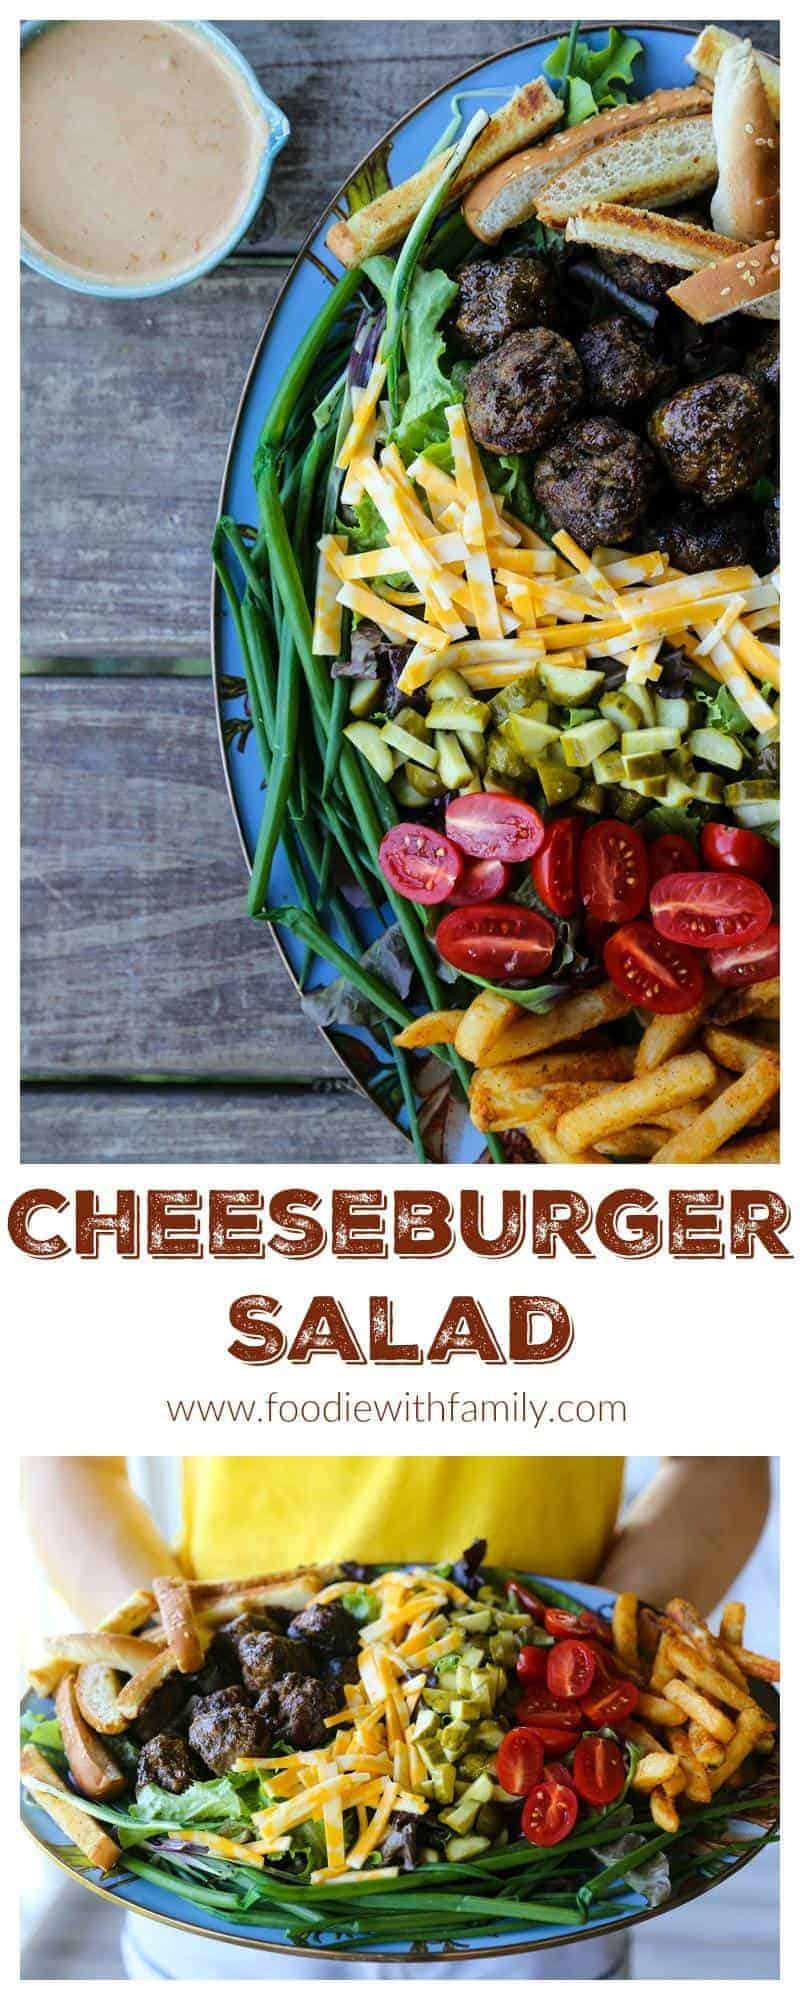 Cheeseburger Salad from foodiewithfamily.com with sesame bun croutons. grilled meatballs and green onions, cheese, pickles, tomatoes, and hot fries.